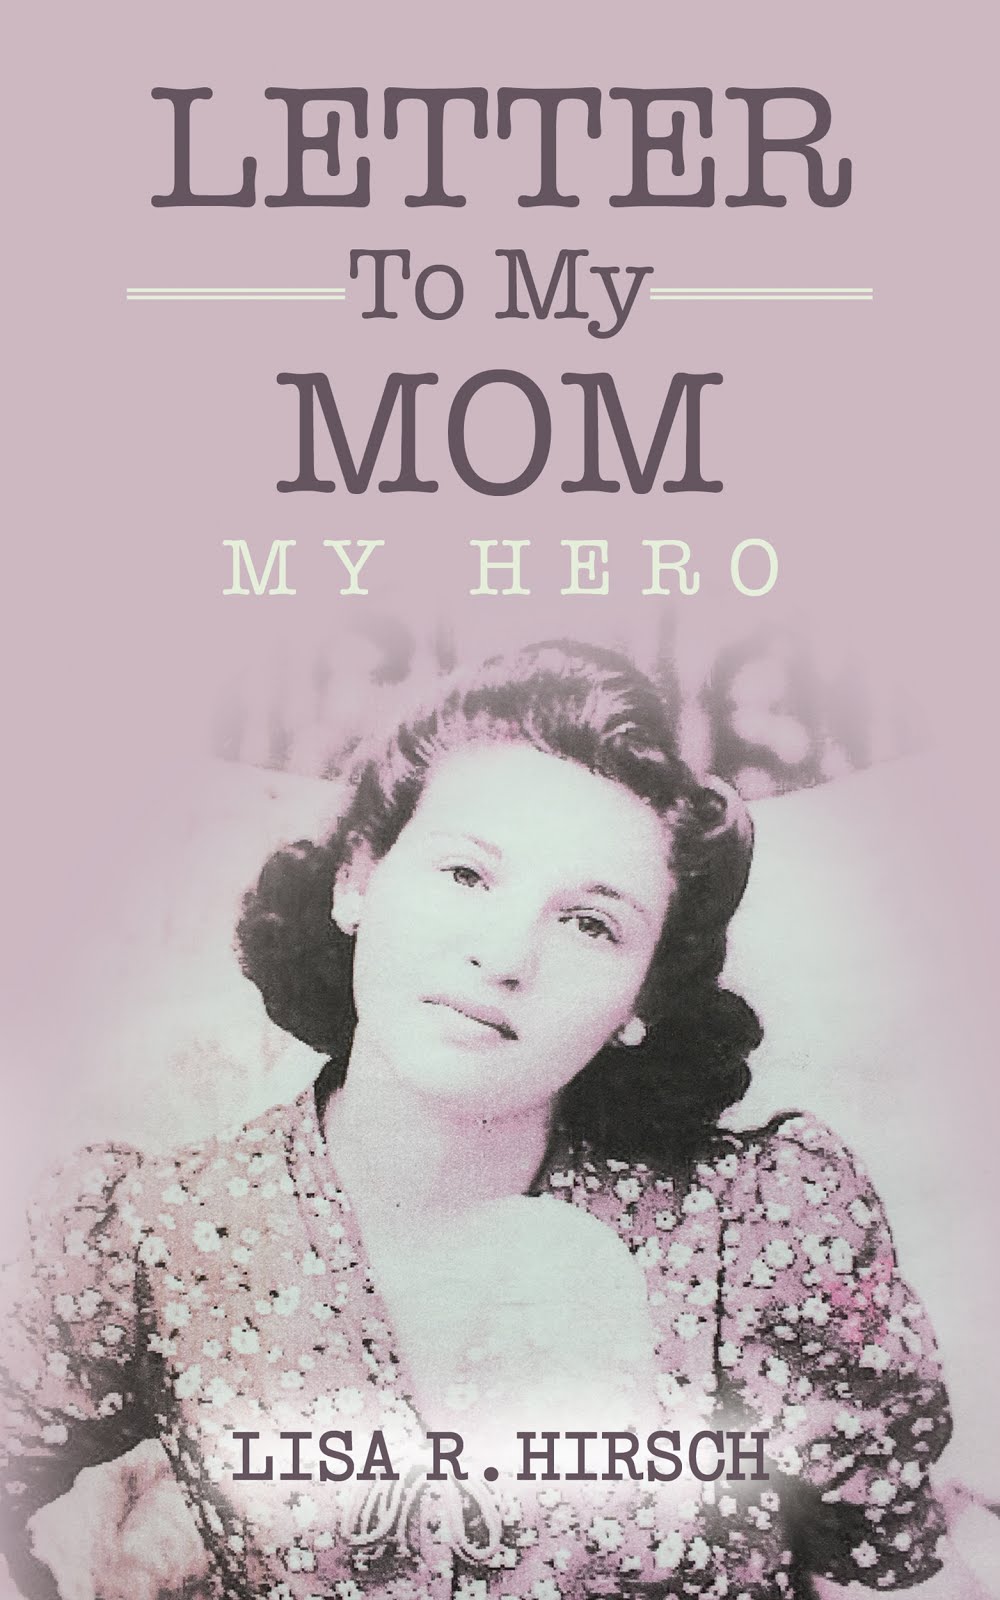 Book Letter To My Mom, My Hero